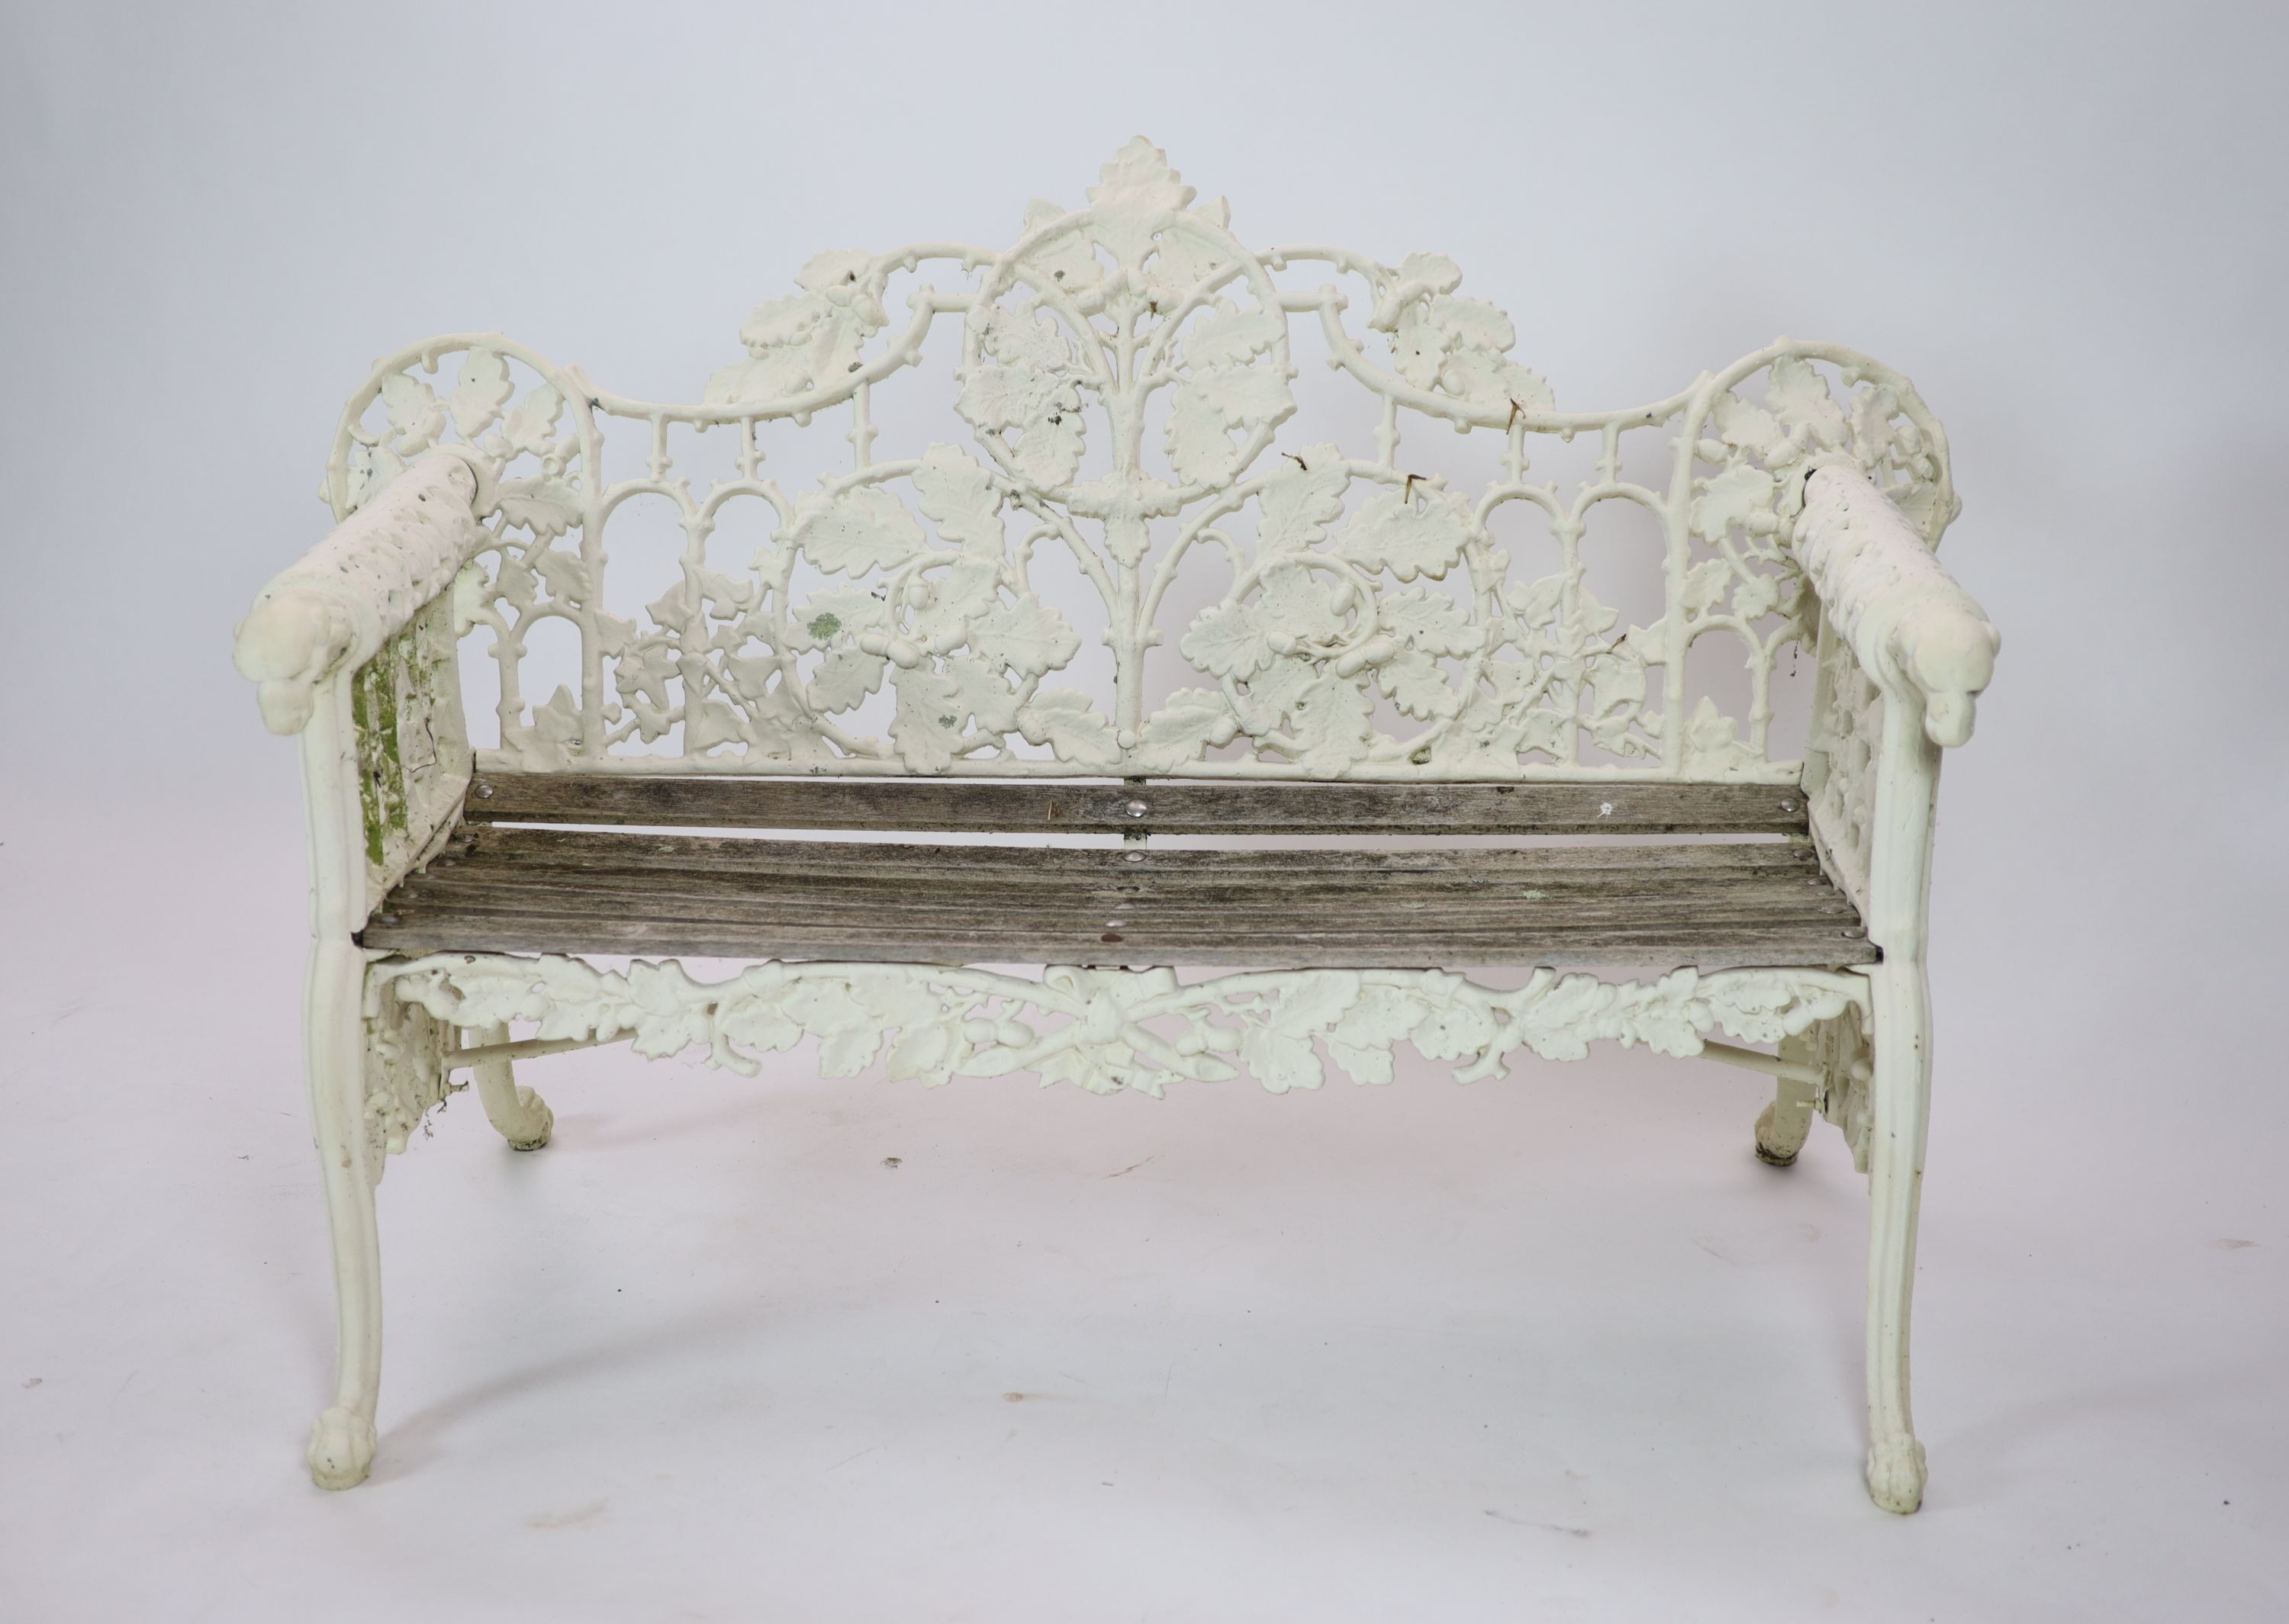 After Coalbrookdale, a pair of cast iron ‘Oak and ivy' bencheswith white paintwork and teak - Image 4 of 4